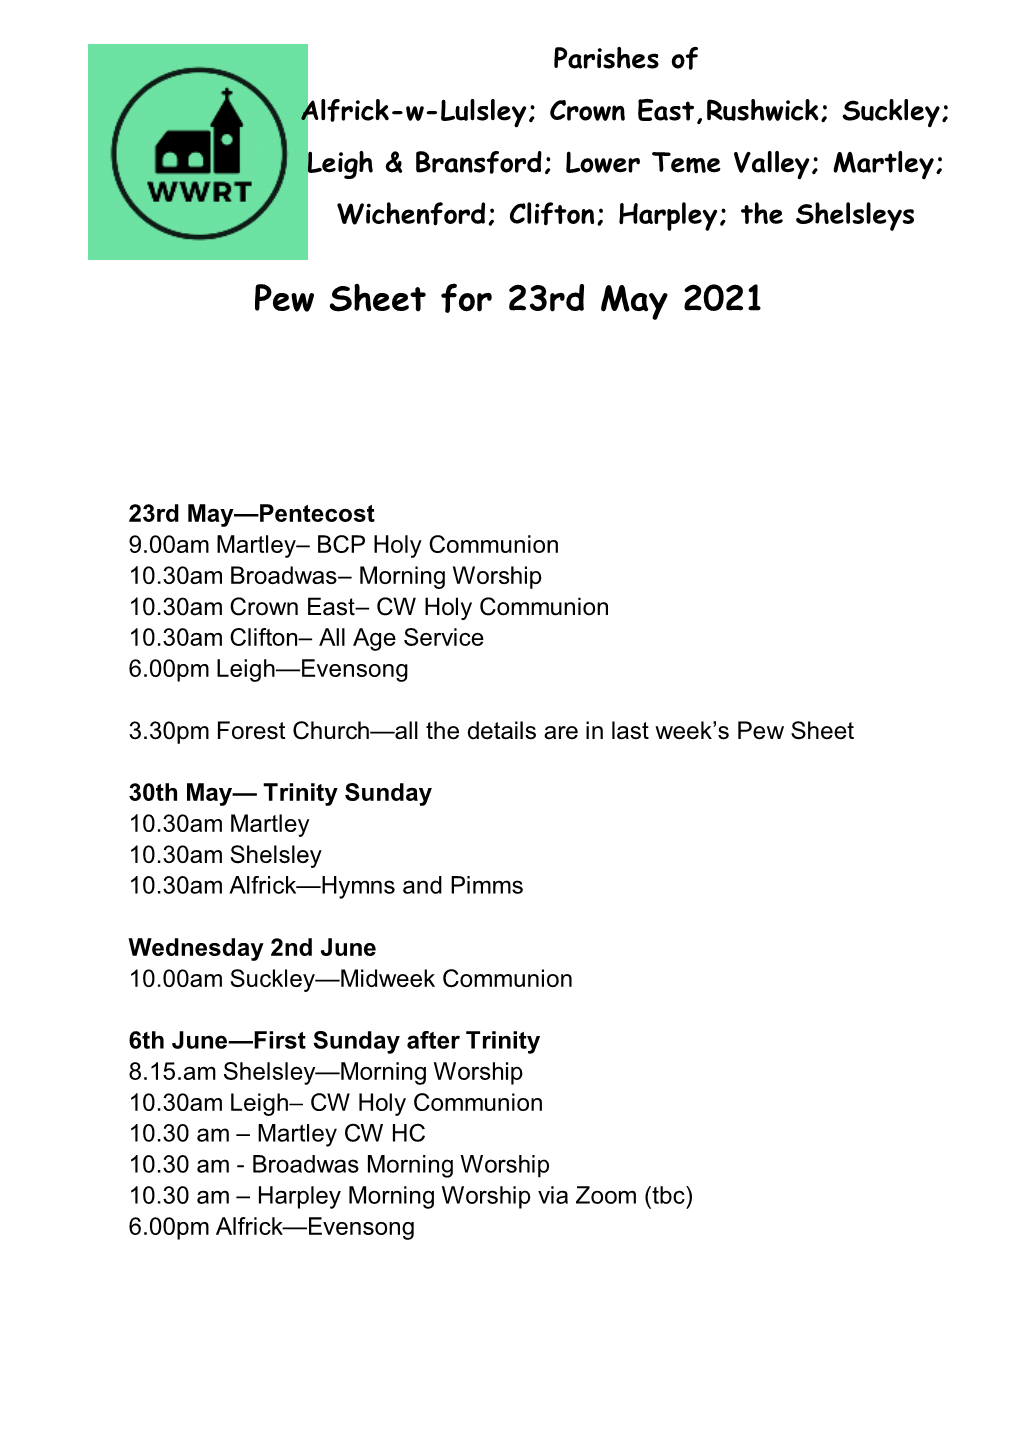 Pew Sheet for 23Rd May 2021